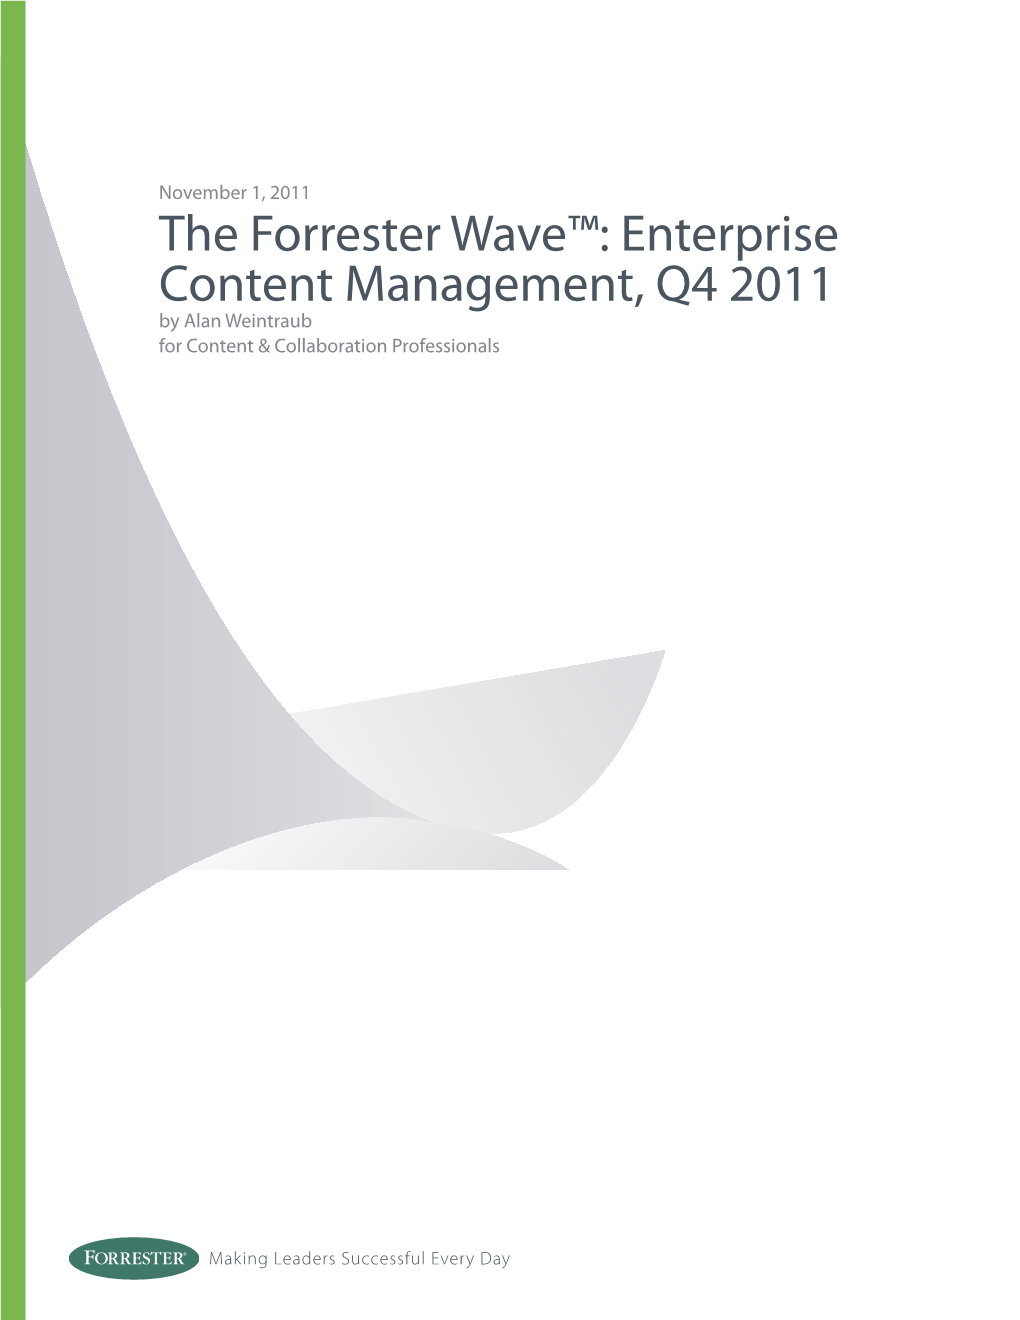 The Forrester Wave™: Enterprise Content Management, Q4 2011 by Alan Weintraub for Content & Collaboration Professionals